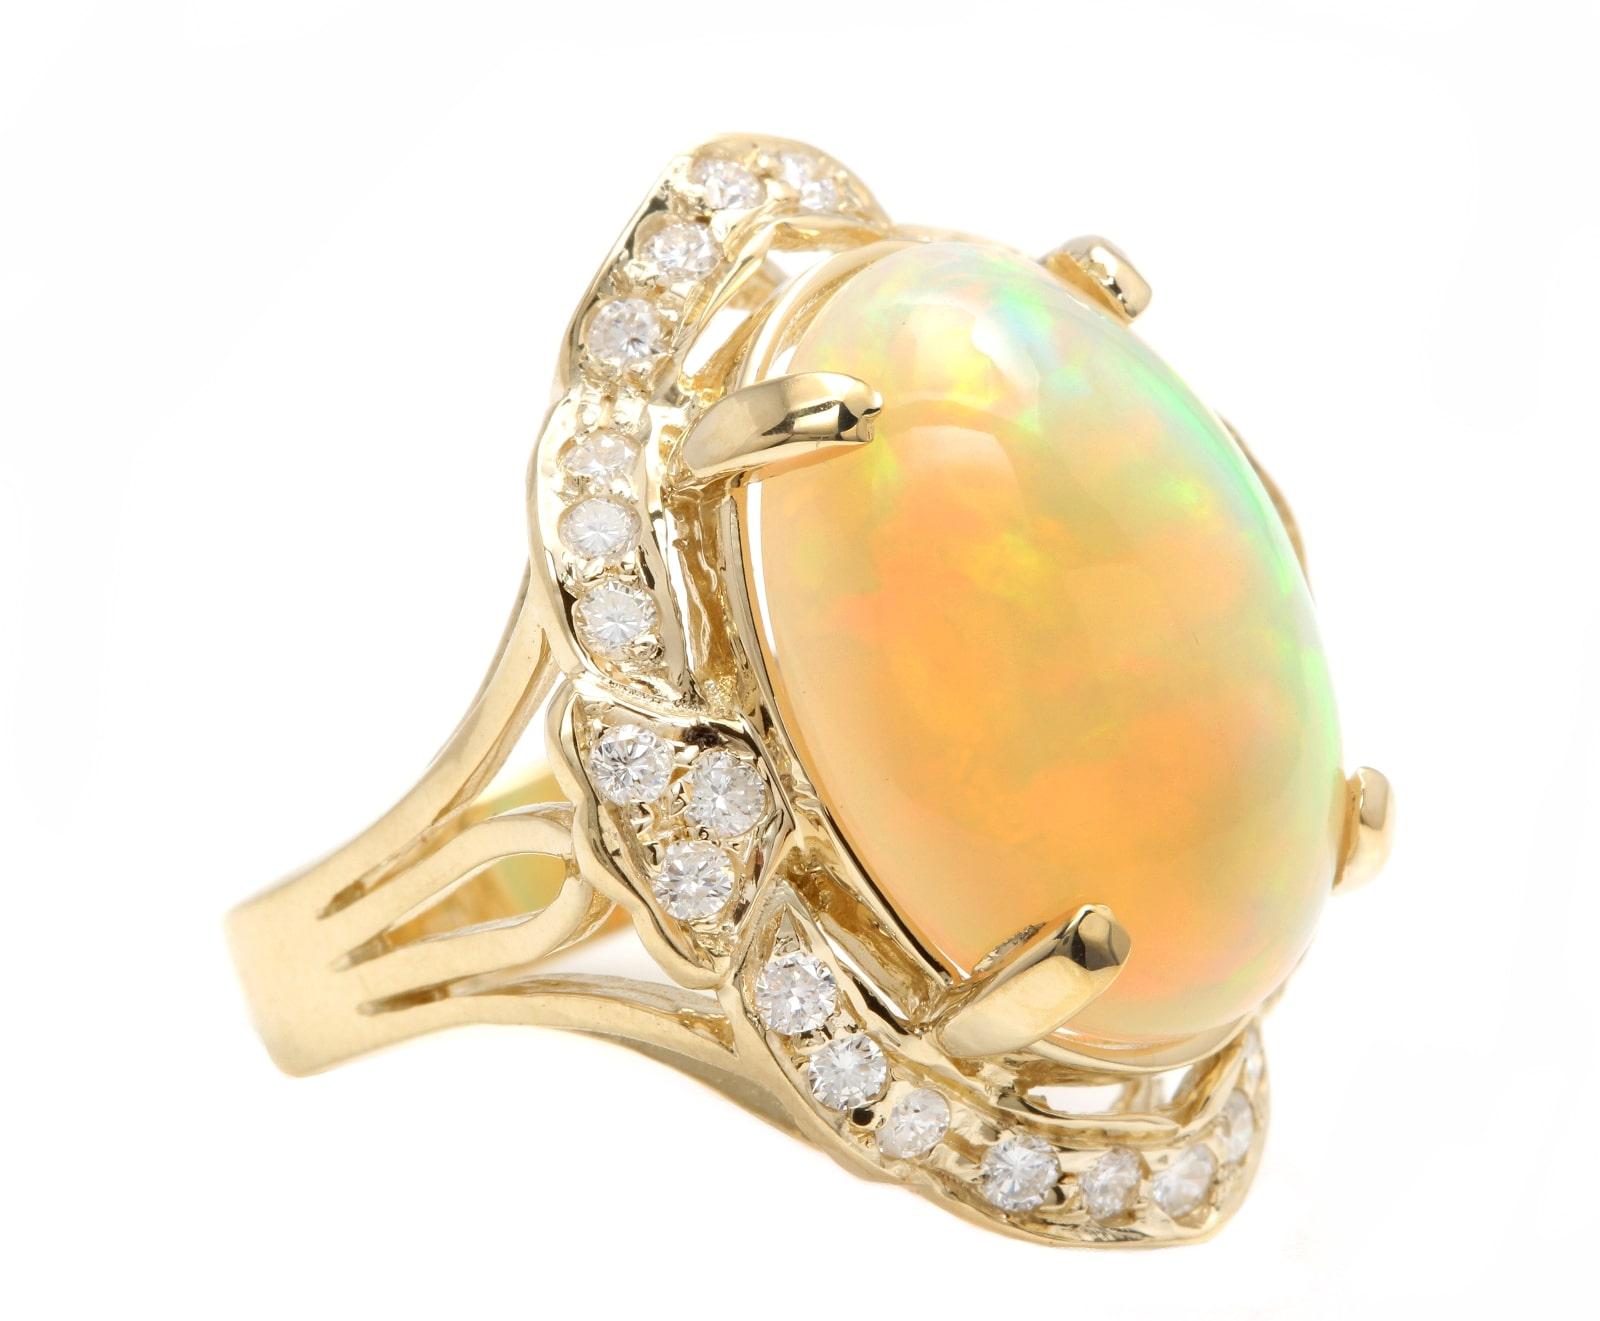 13.70 Carats Natural  Impressive Ethiopian Opal and Diamond 14K Solid Yellow Gold Ring

The opal has beautiful fire, pictures don't show the whole beauty of the opal!

Suggested Replacement Value: $6,800.00

Total Natural Opal Weight is: Approx.